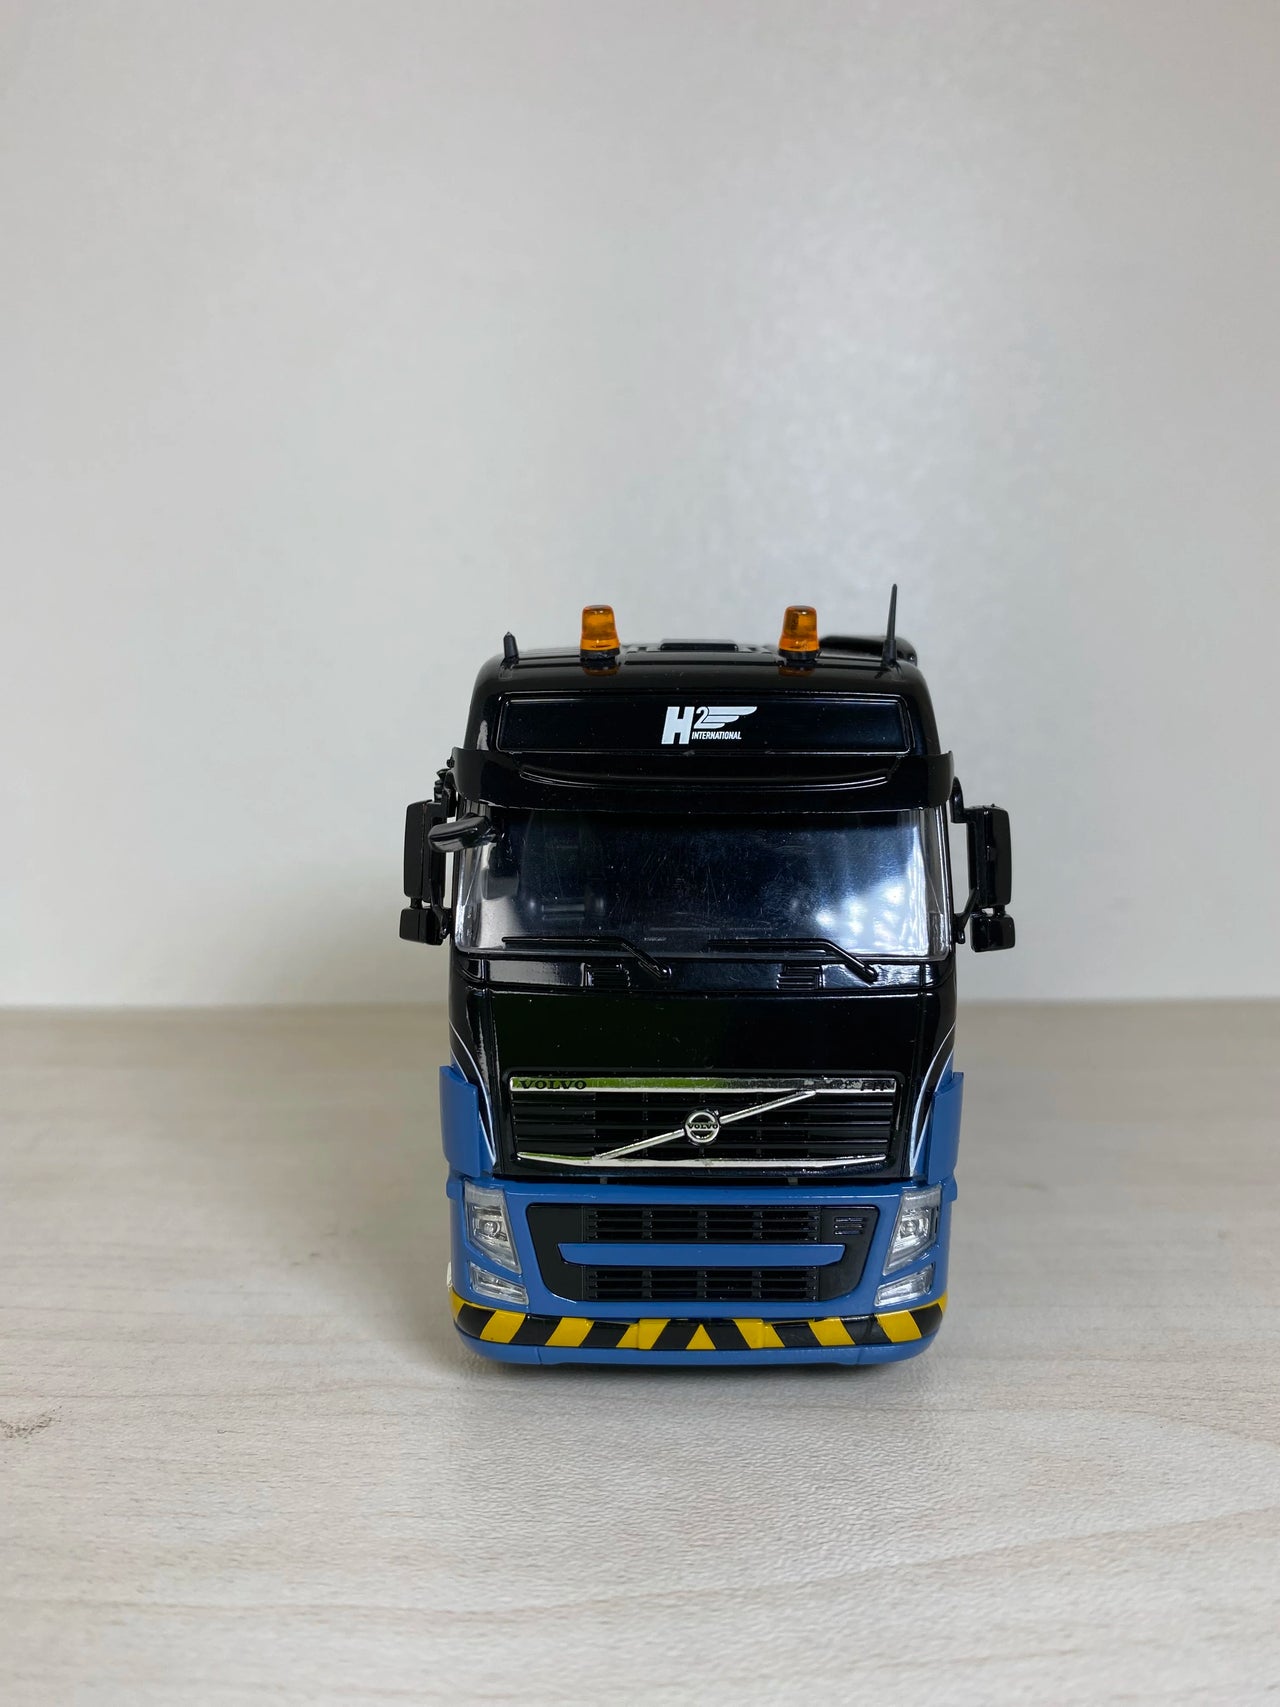 33-0018 Volvo H2 International Tractor Truck Scale 1:50 (Discontinued Model)